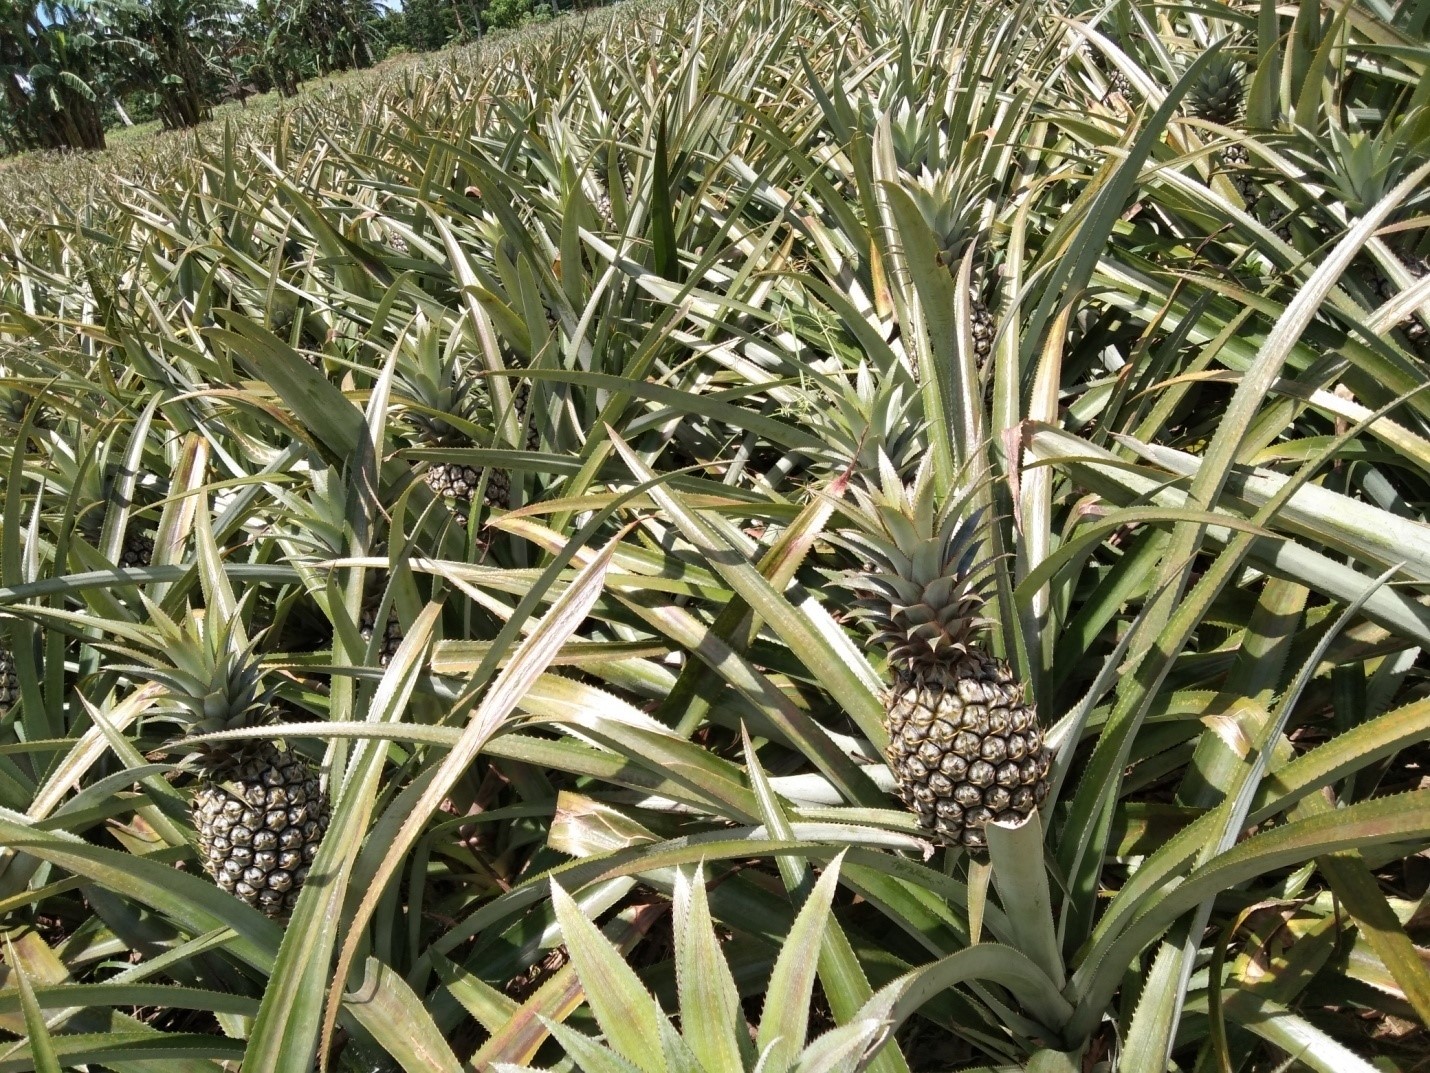 R&D project on queen pineapple in CamNorte pushed image